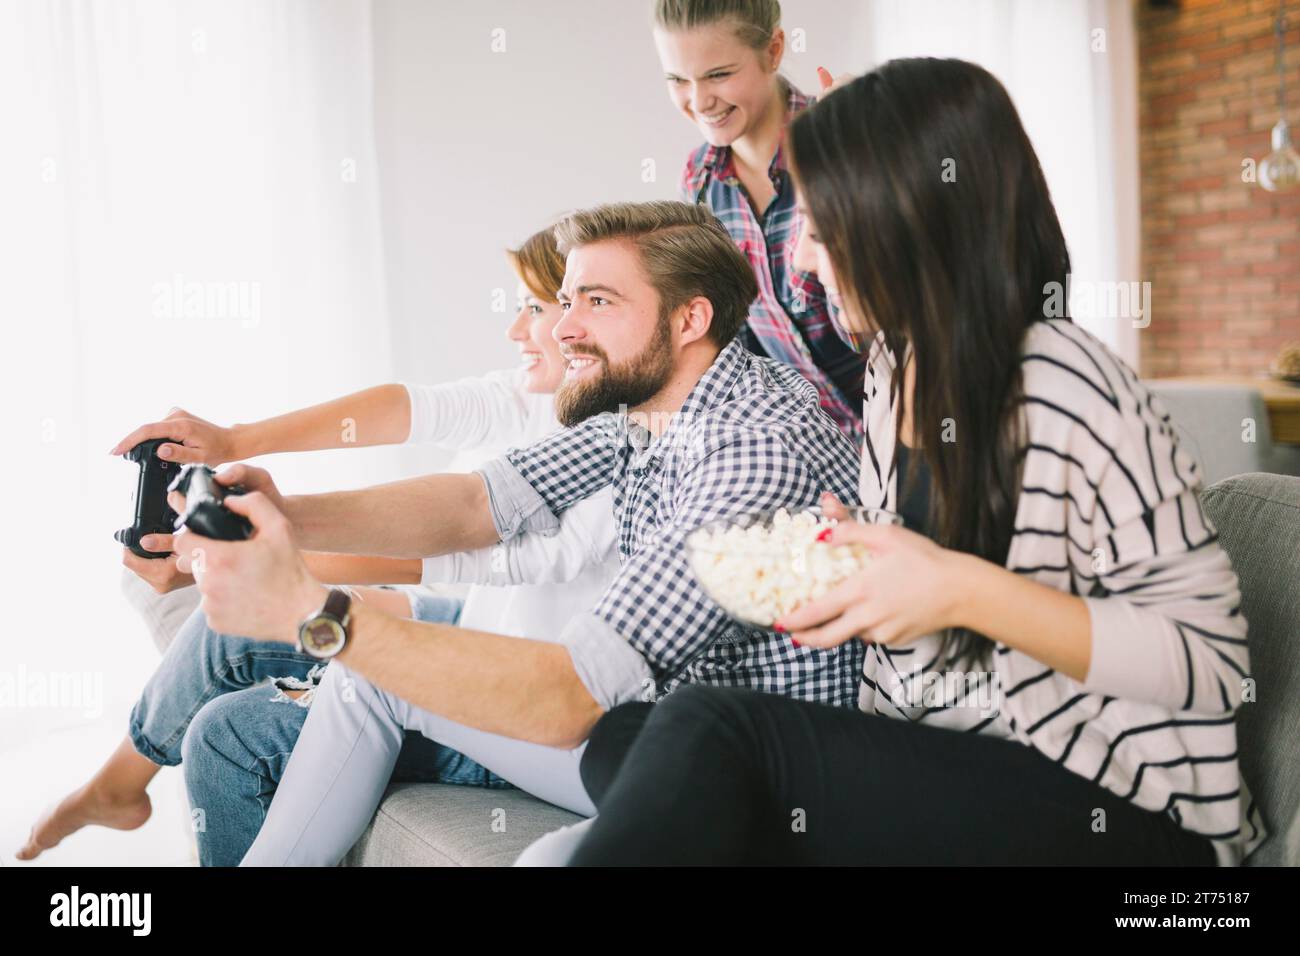 Cheerful people playing game party Stock Photo